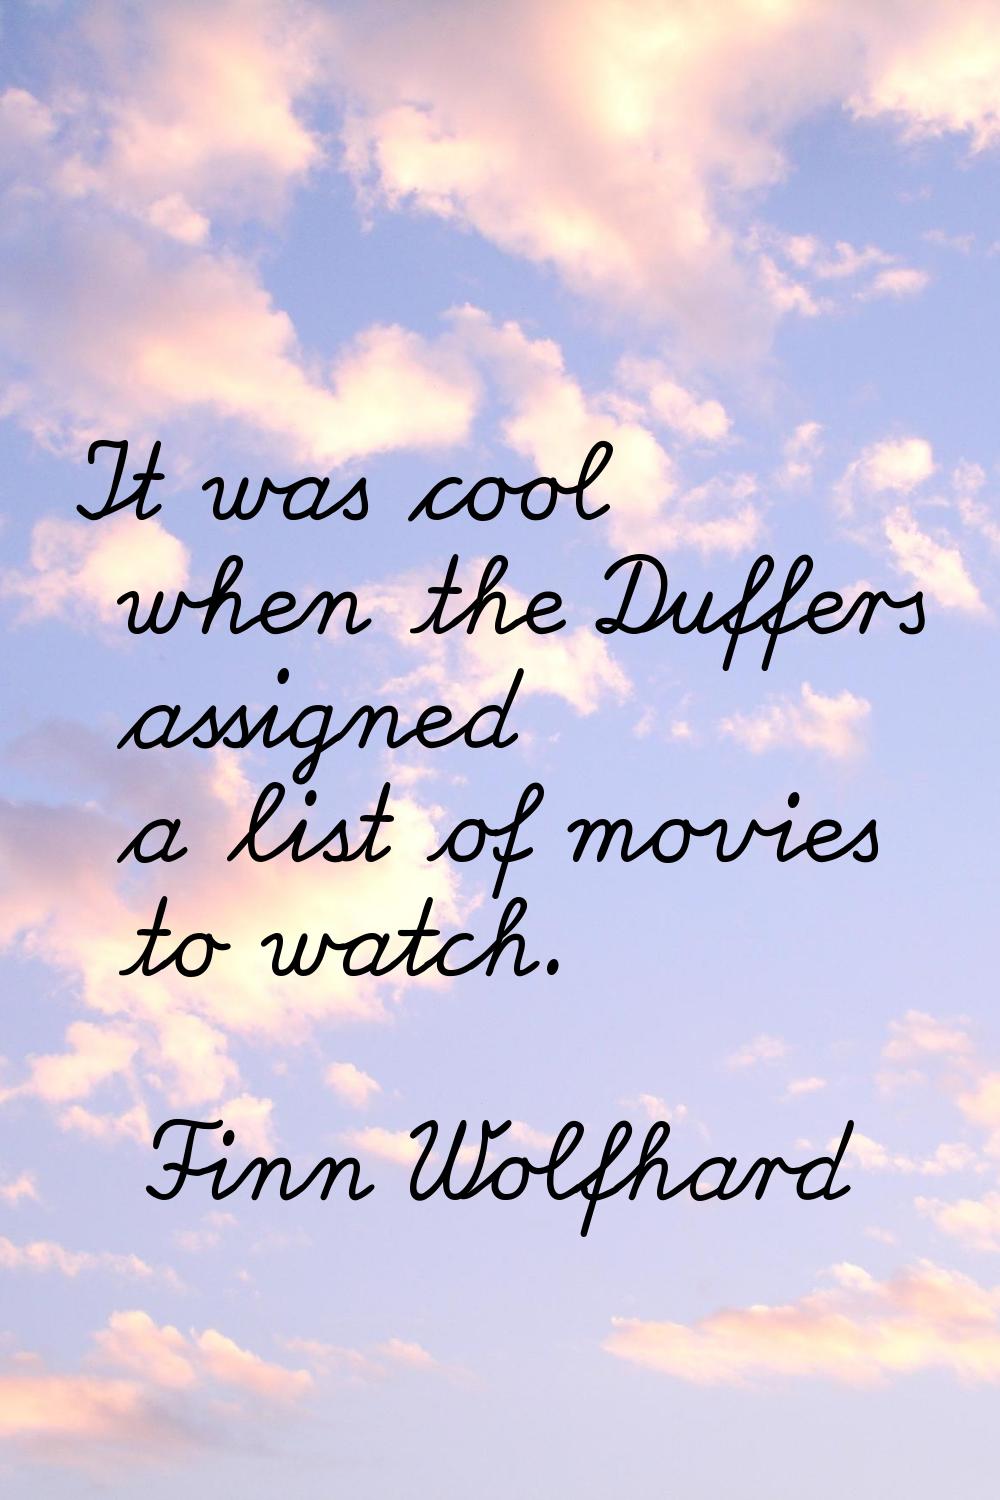 It was cool when the Duffers assigned a list of movies to watch.